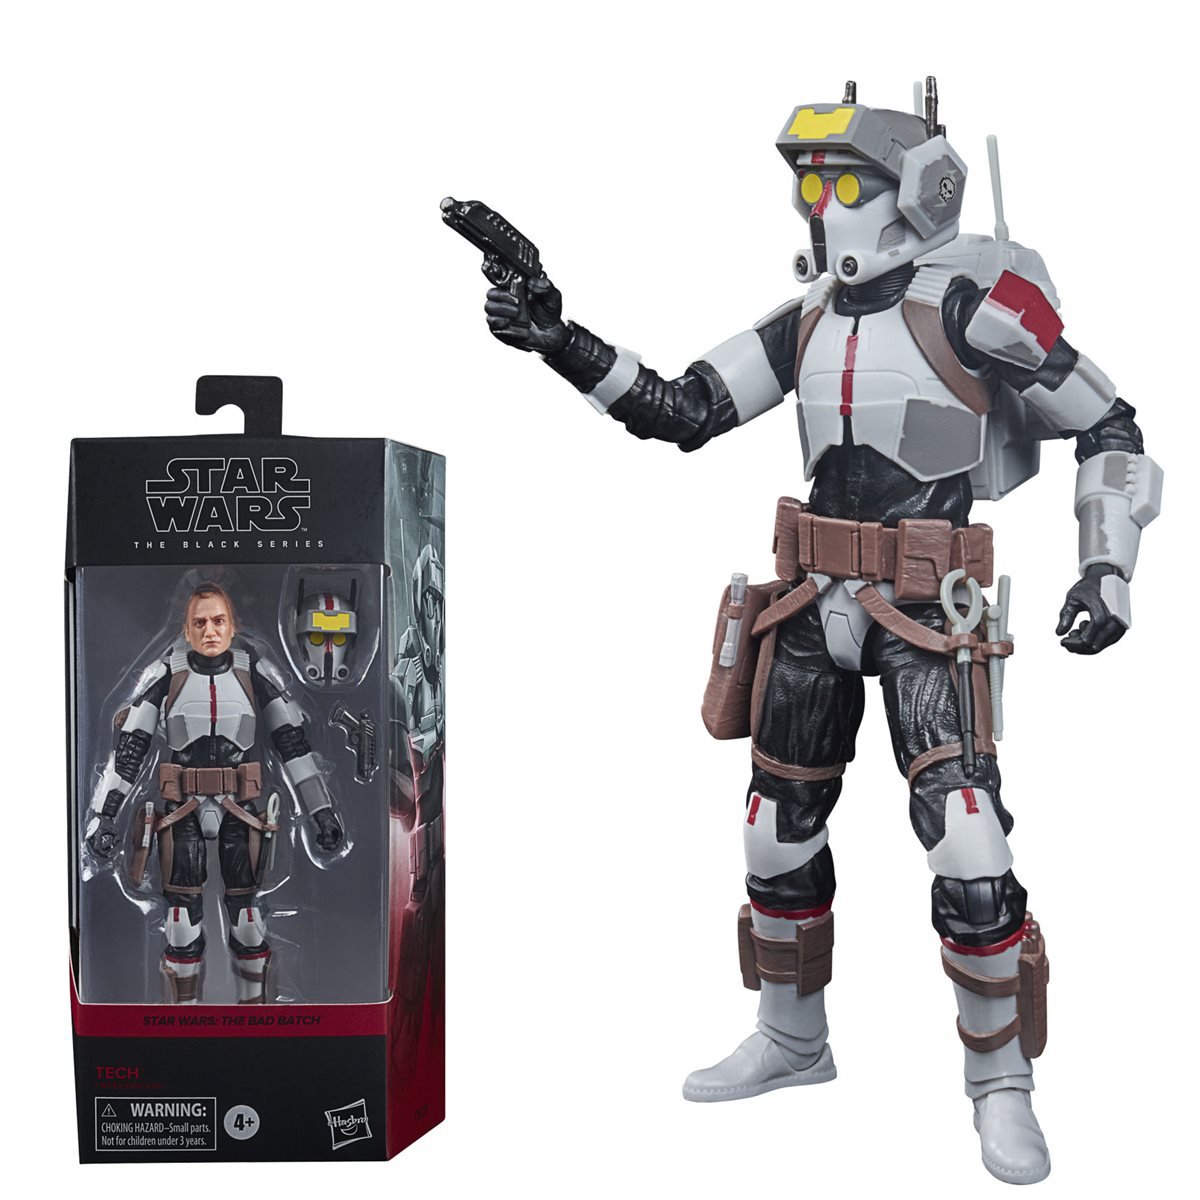 Star Wars The Black Series Tech 6-Inch Action Figure画像